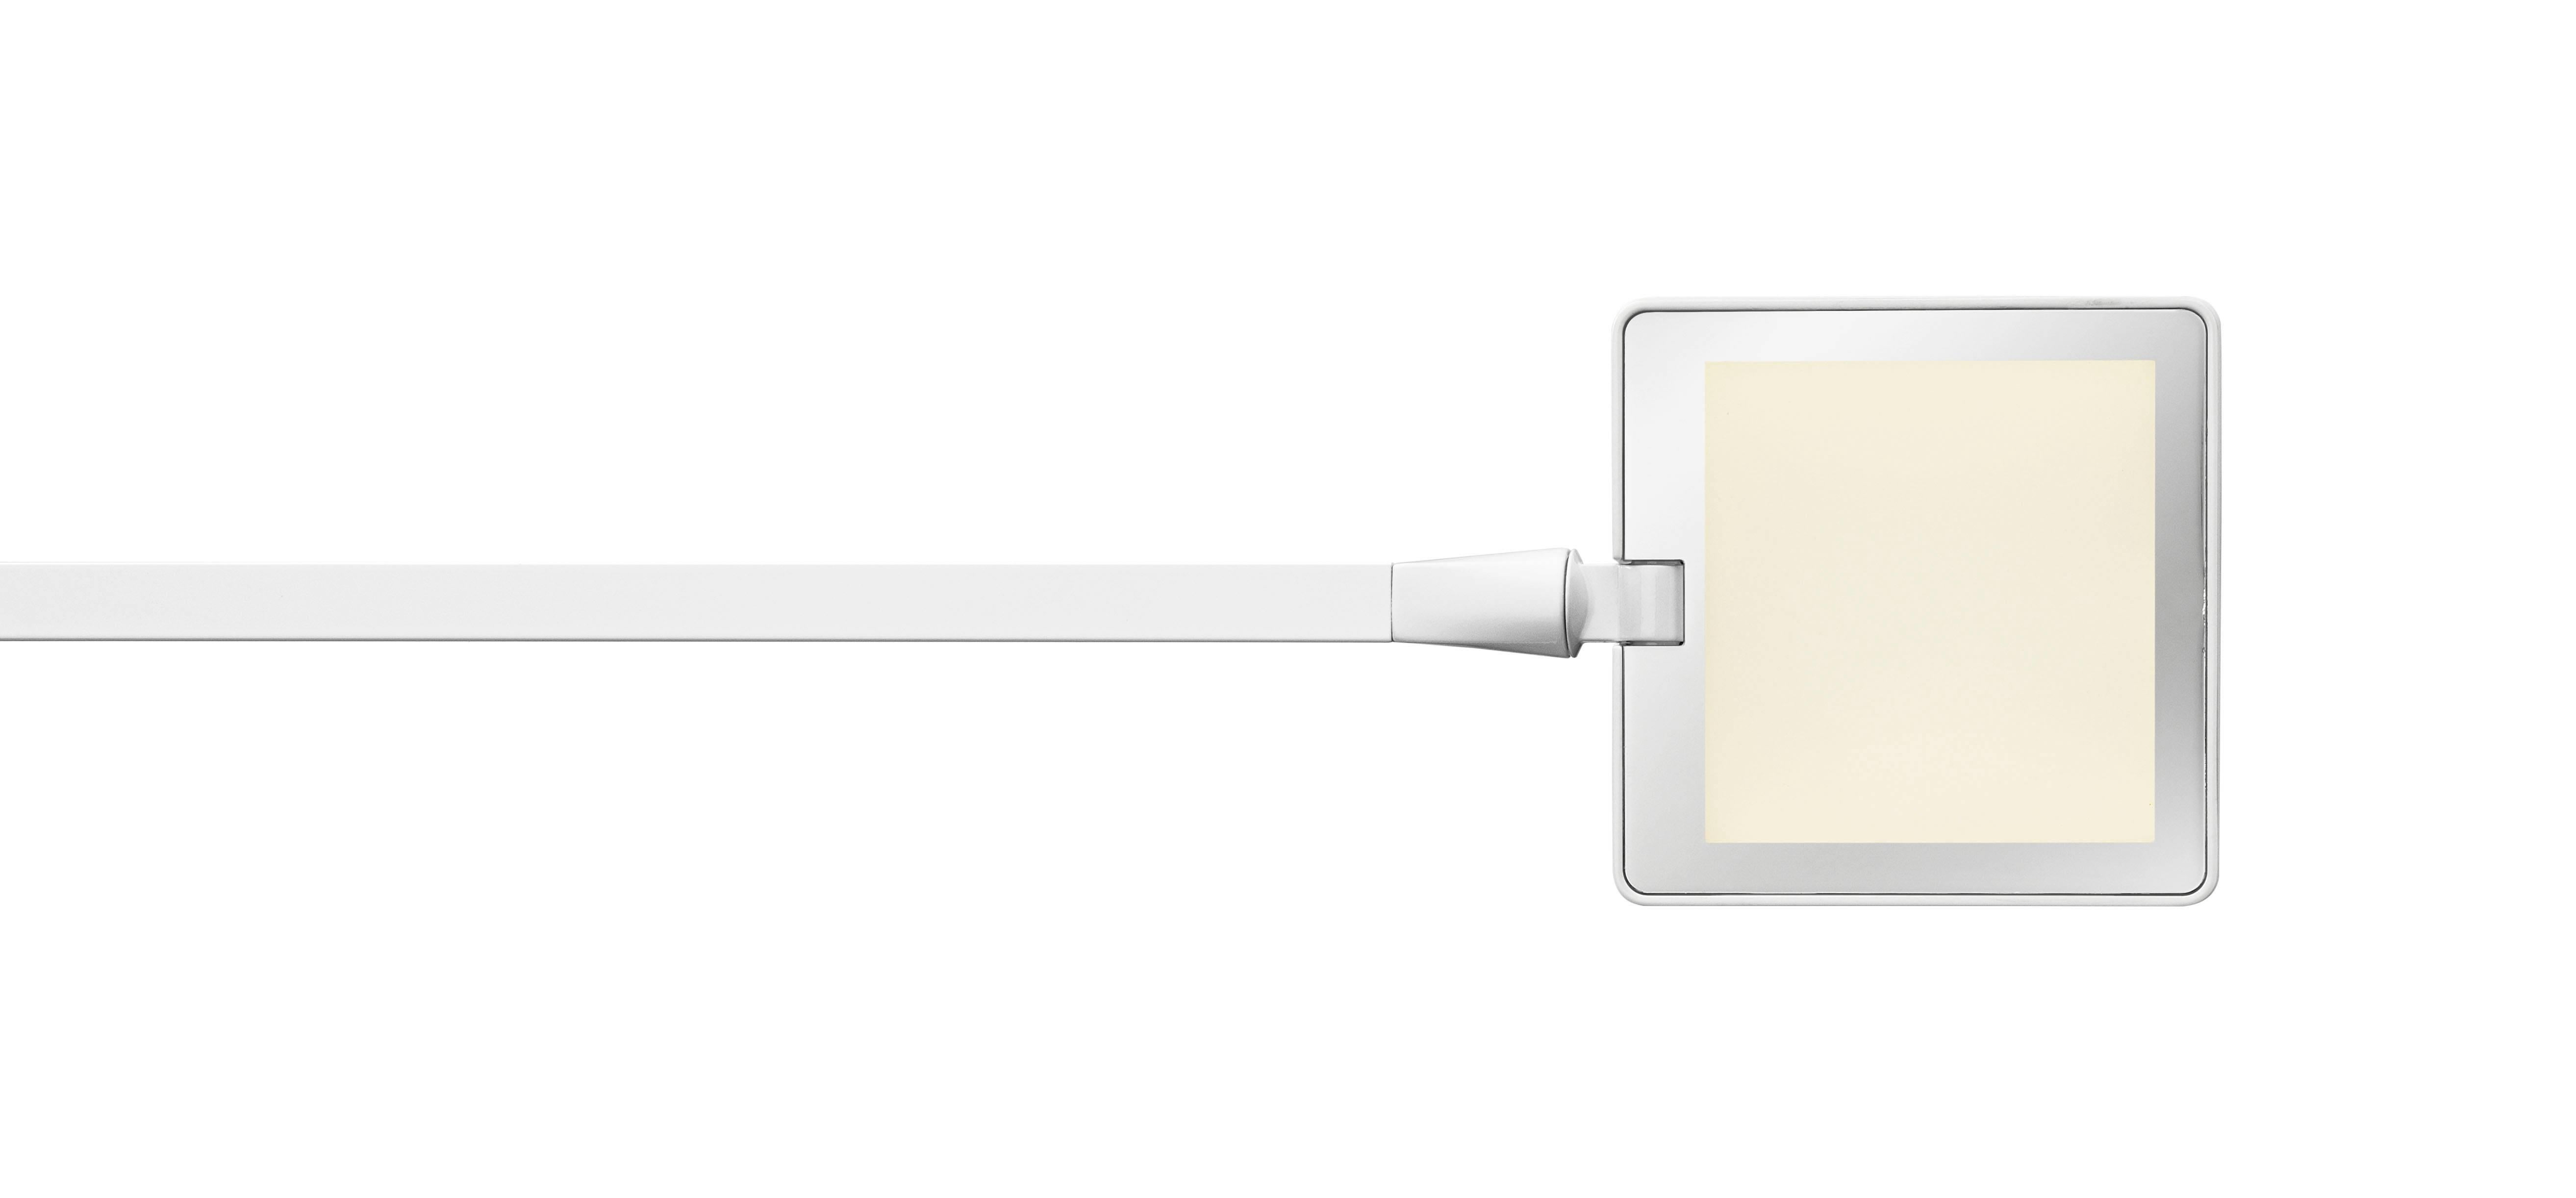 The newest addition to the popular Kelvin LED family, the Kelvin Edge offers the innovation and sleek design of the collection in a smaller package—without sacrificing output. Featuring the exclusive Edge Lighting Technology™ from which it takes its